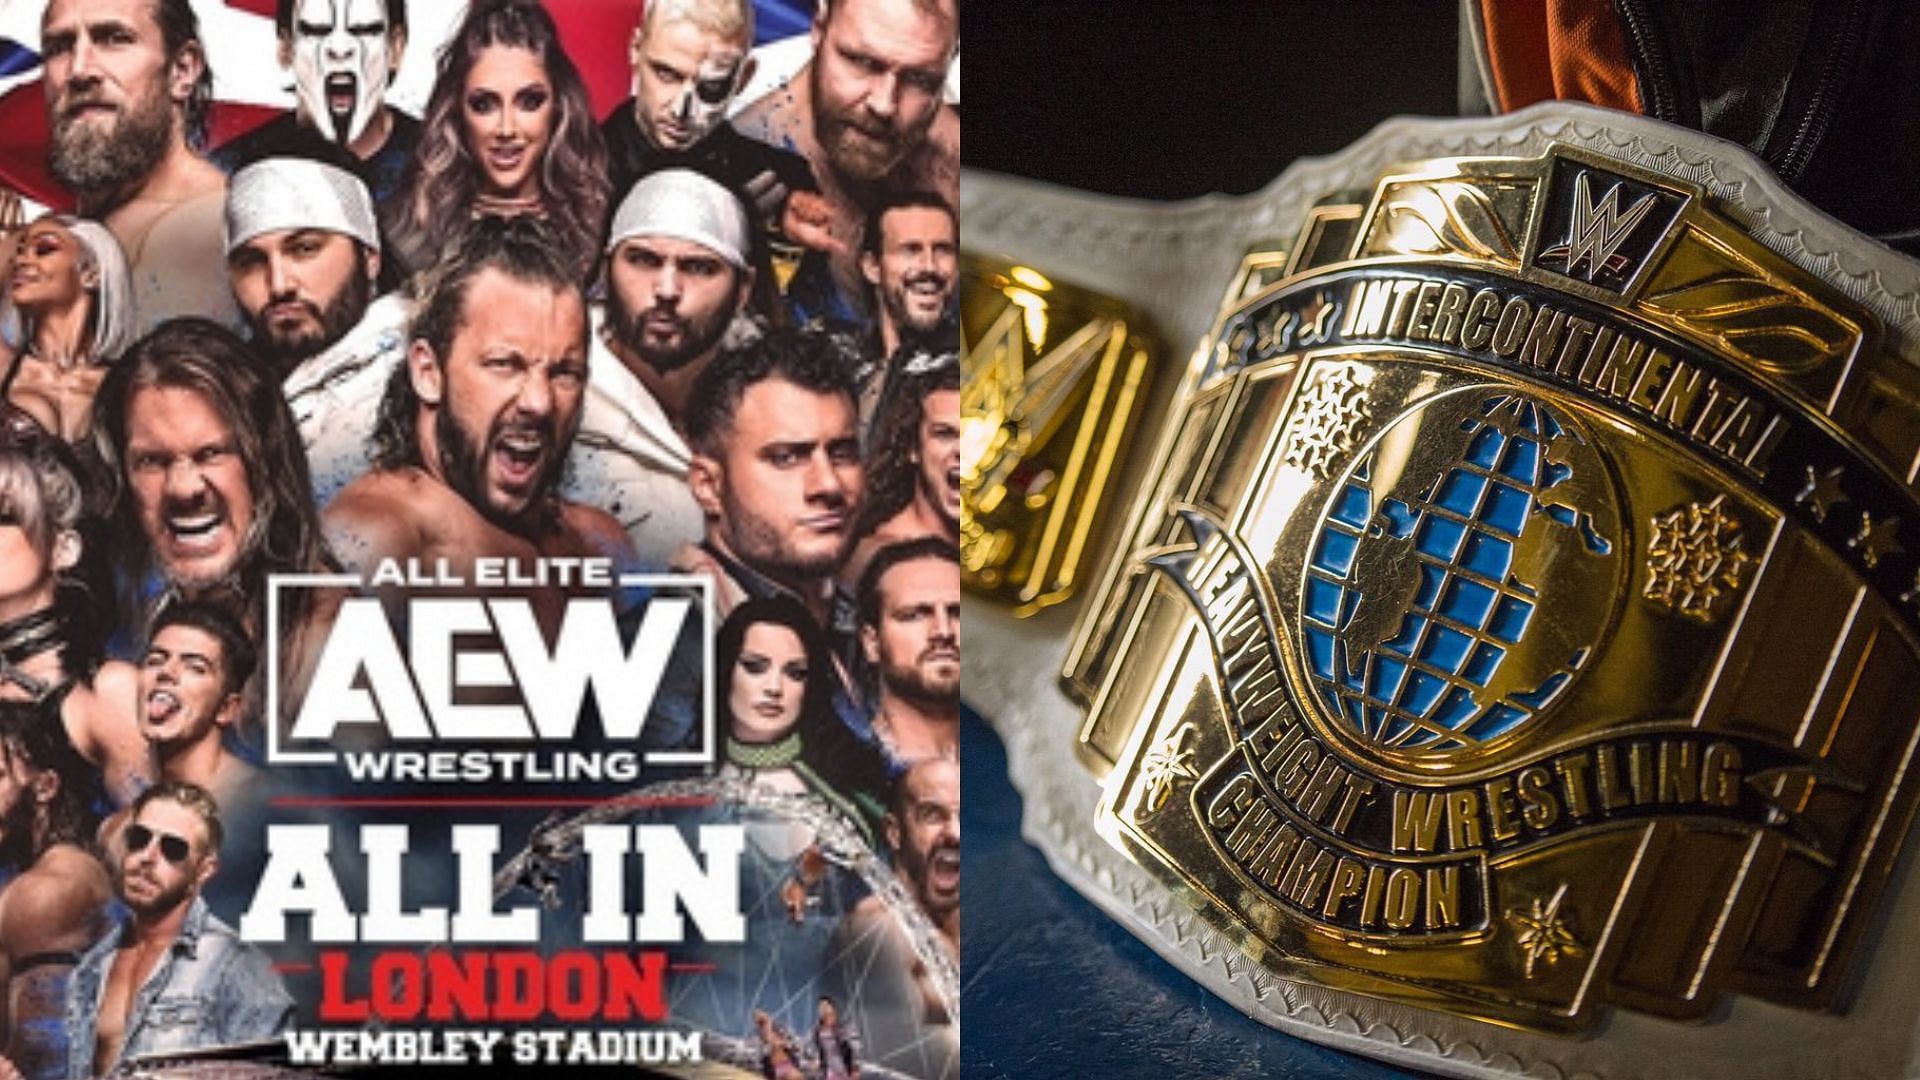 A former Intercontinental Champion hopes to be at AEW All In this August.